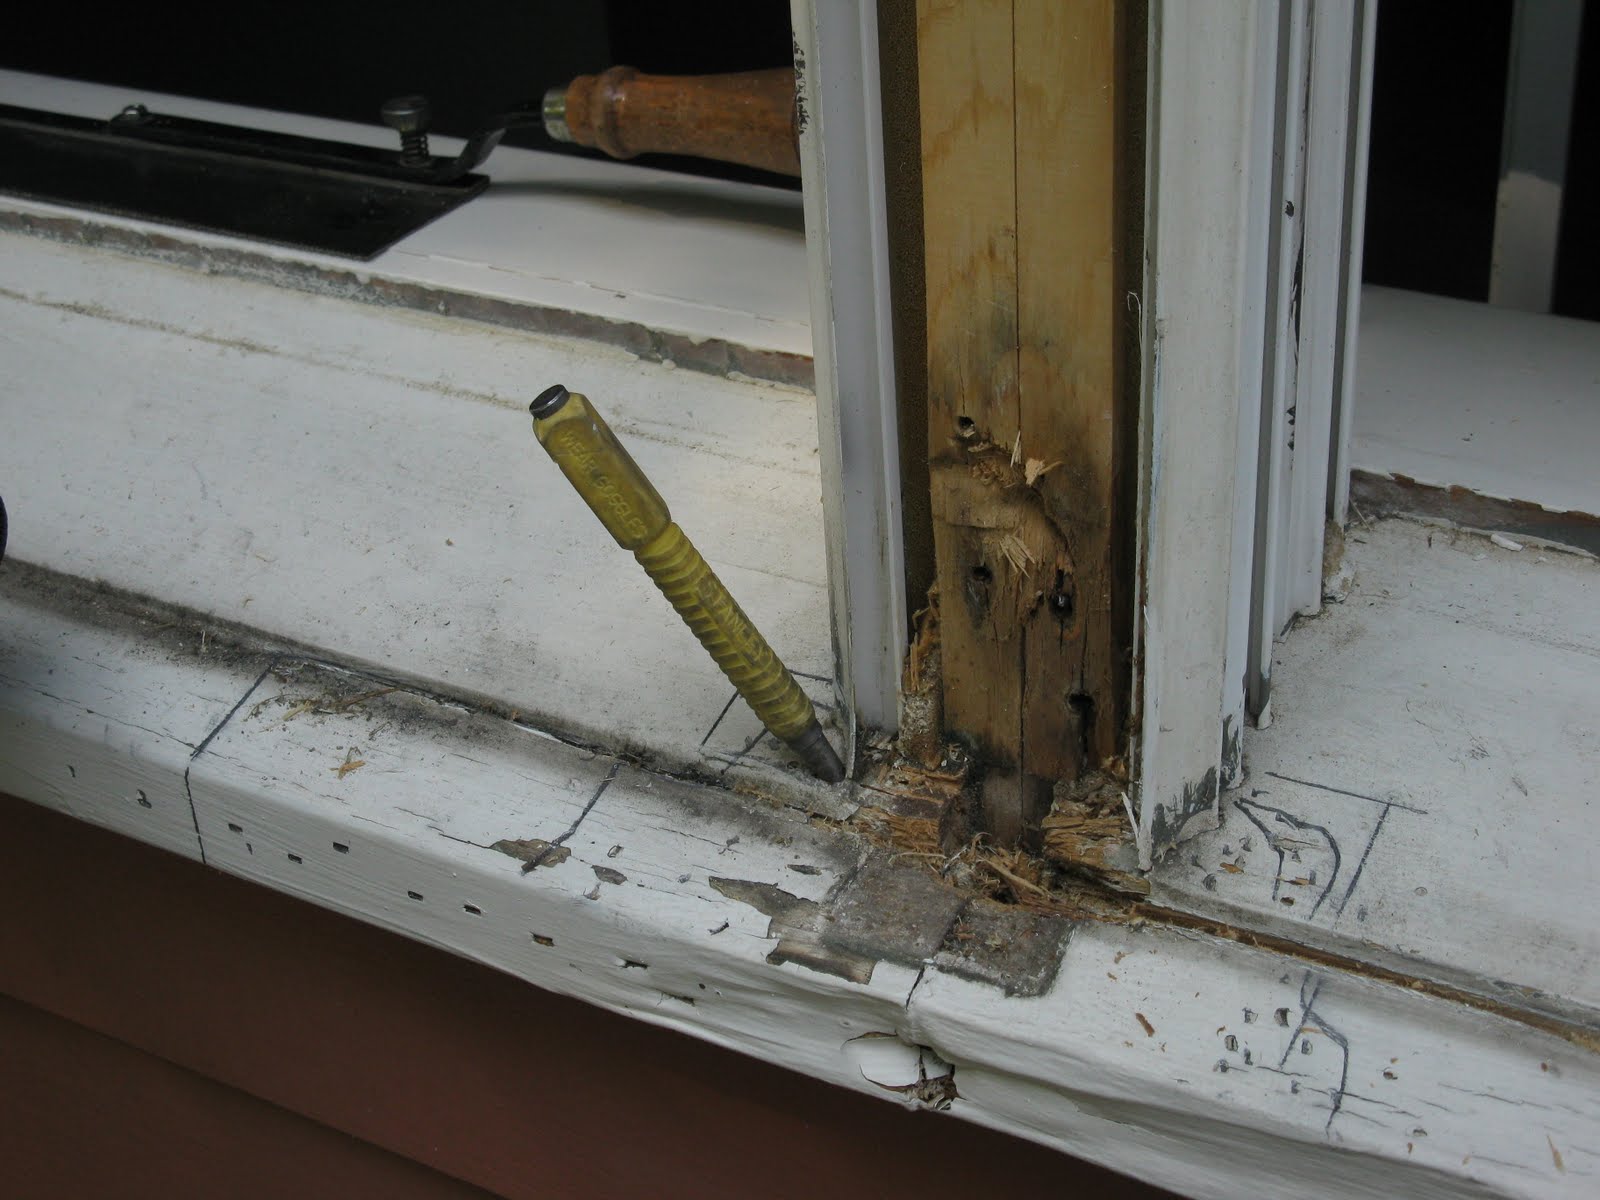 Repairing A Window Sill - Concord Carpenter A Carpenter Cut The Top Section Of A Window Frame